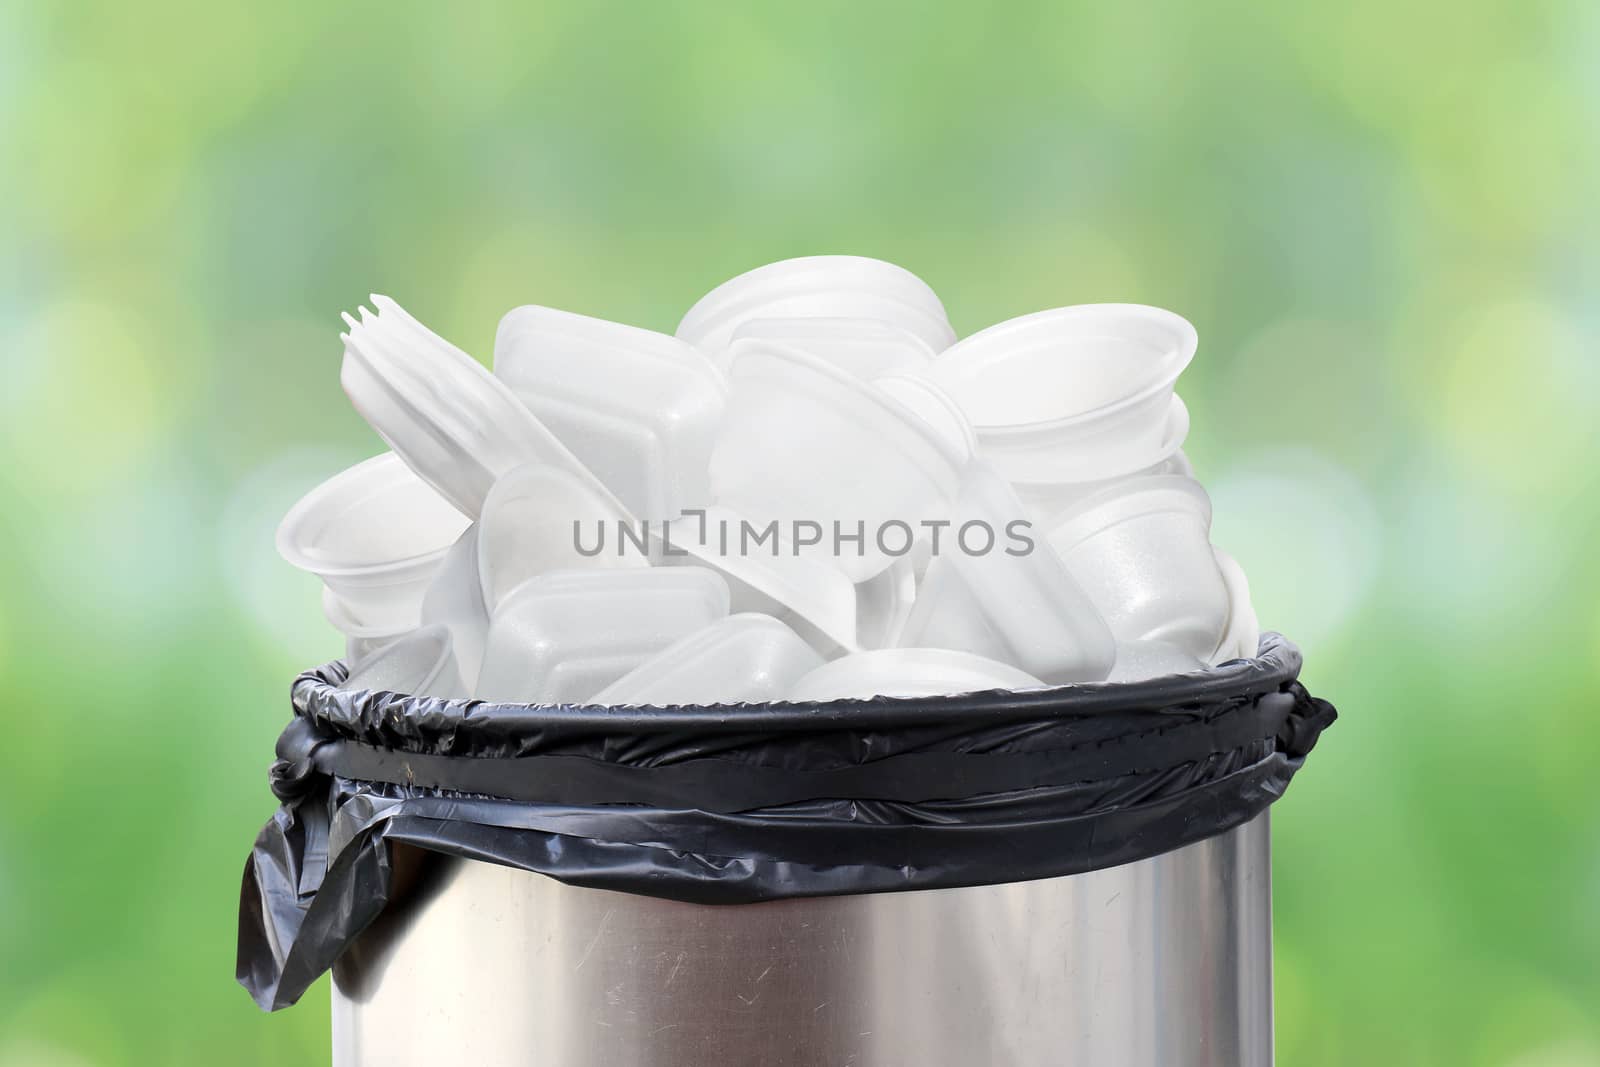 bin of waste foam tray on nature green background, waste garbage foam food tray white many pile on plastic recycle and bin stainless